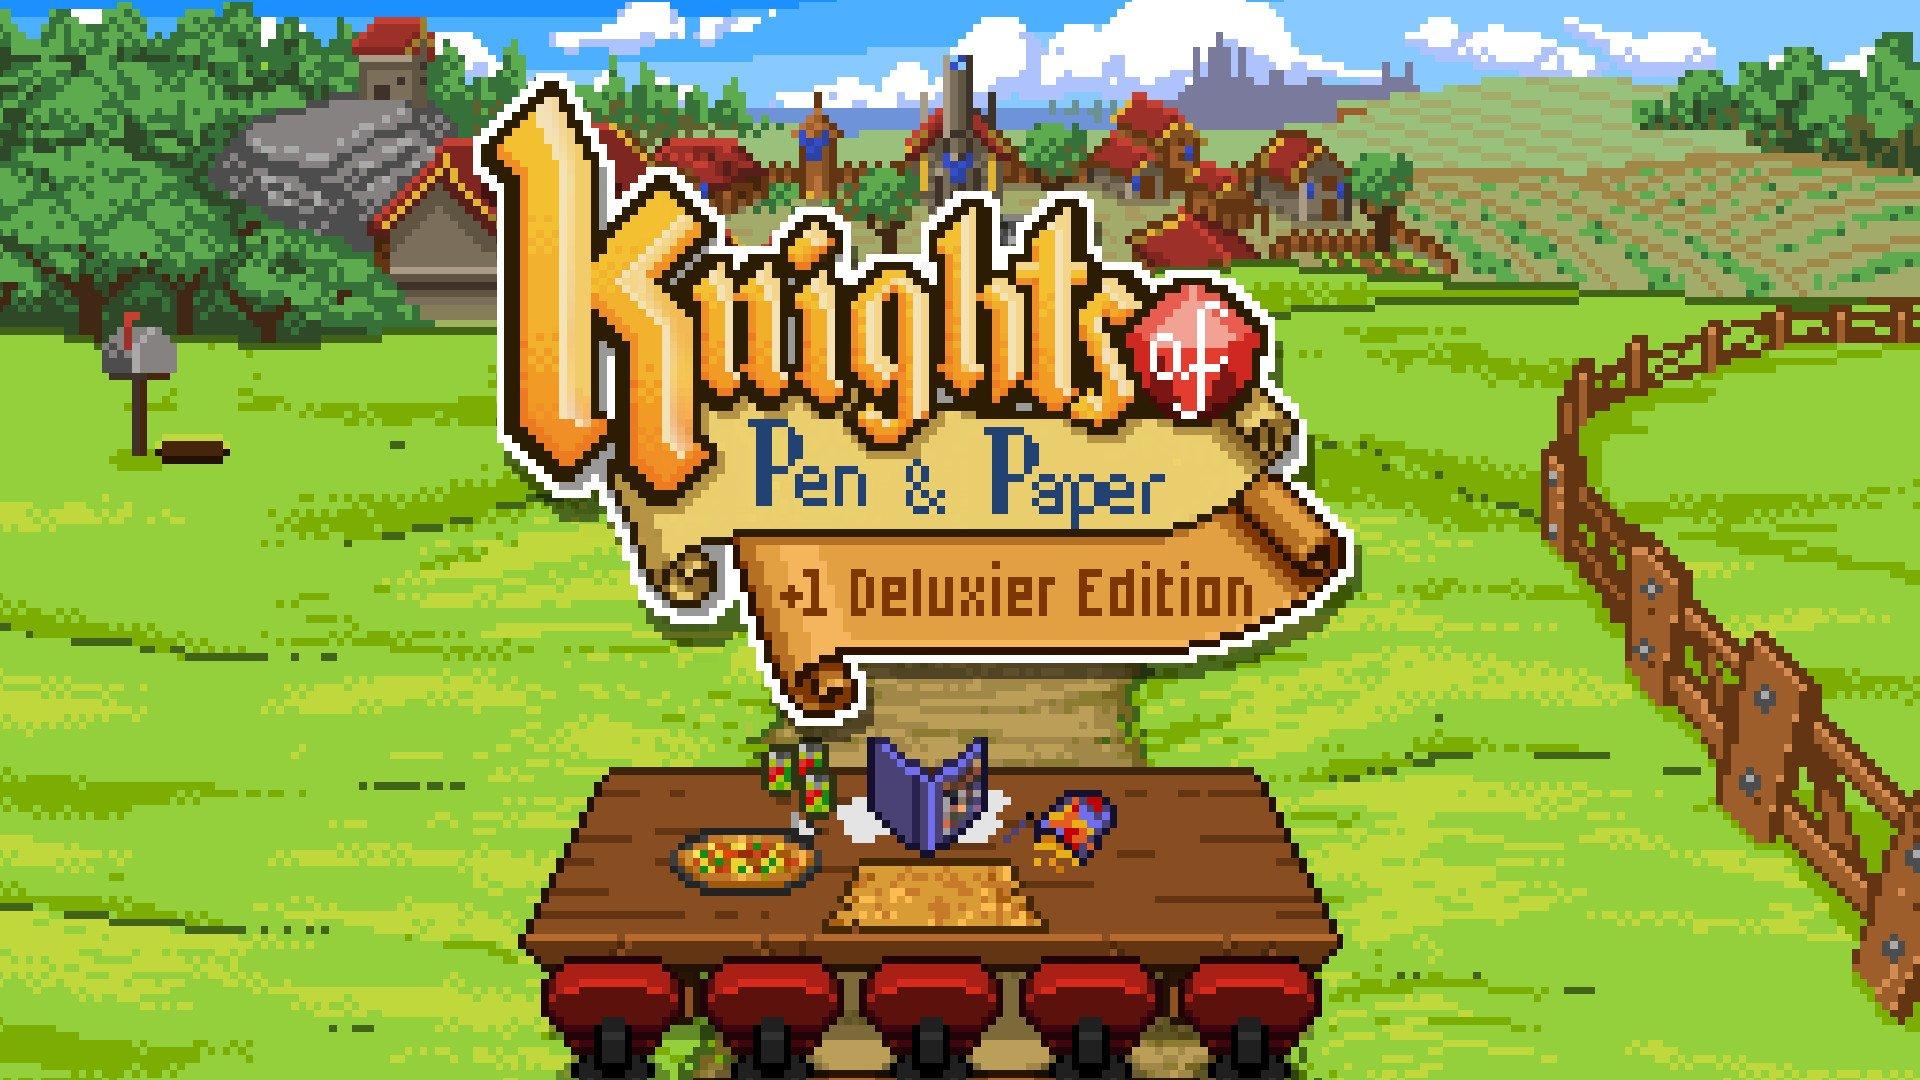 Knights of Pen and Paper Plus 1 Deluxier Edition